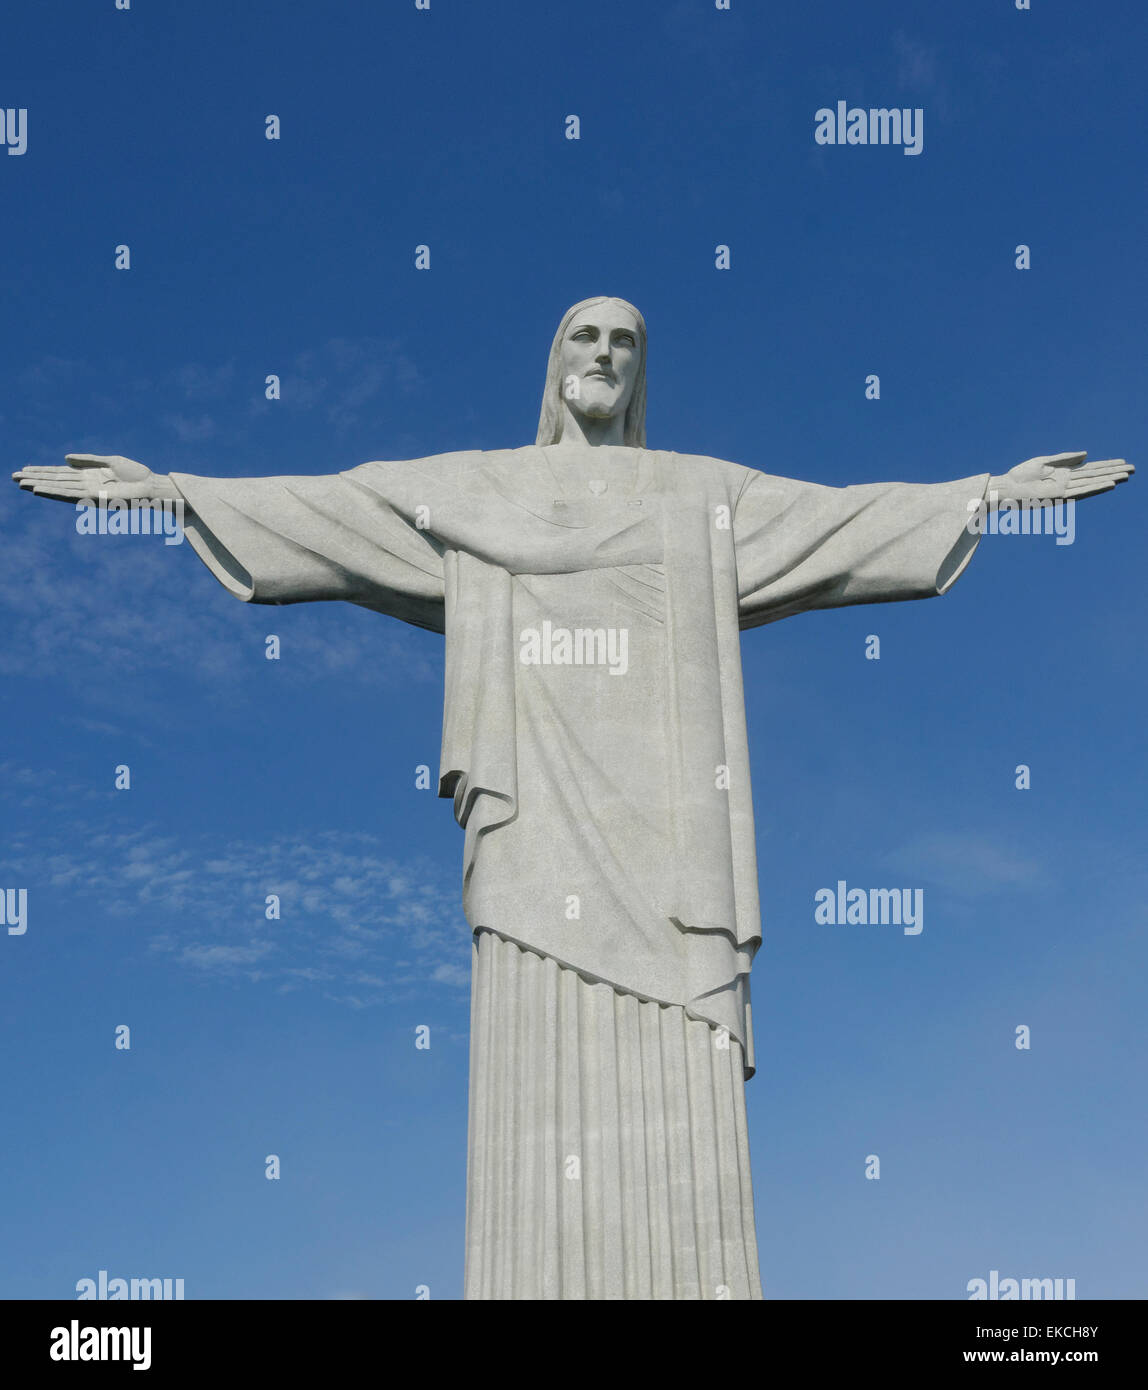 The outstretched arms of the statue of Christ the Redeemer on top of the Corcovado mountain. Rio de Janeiro, Brazil. Stock Photo